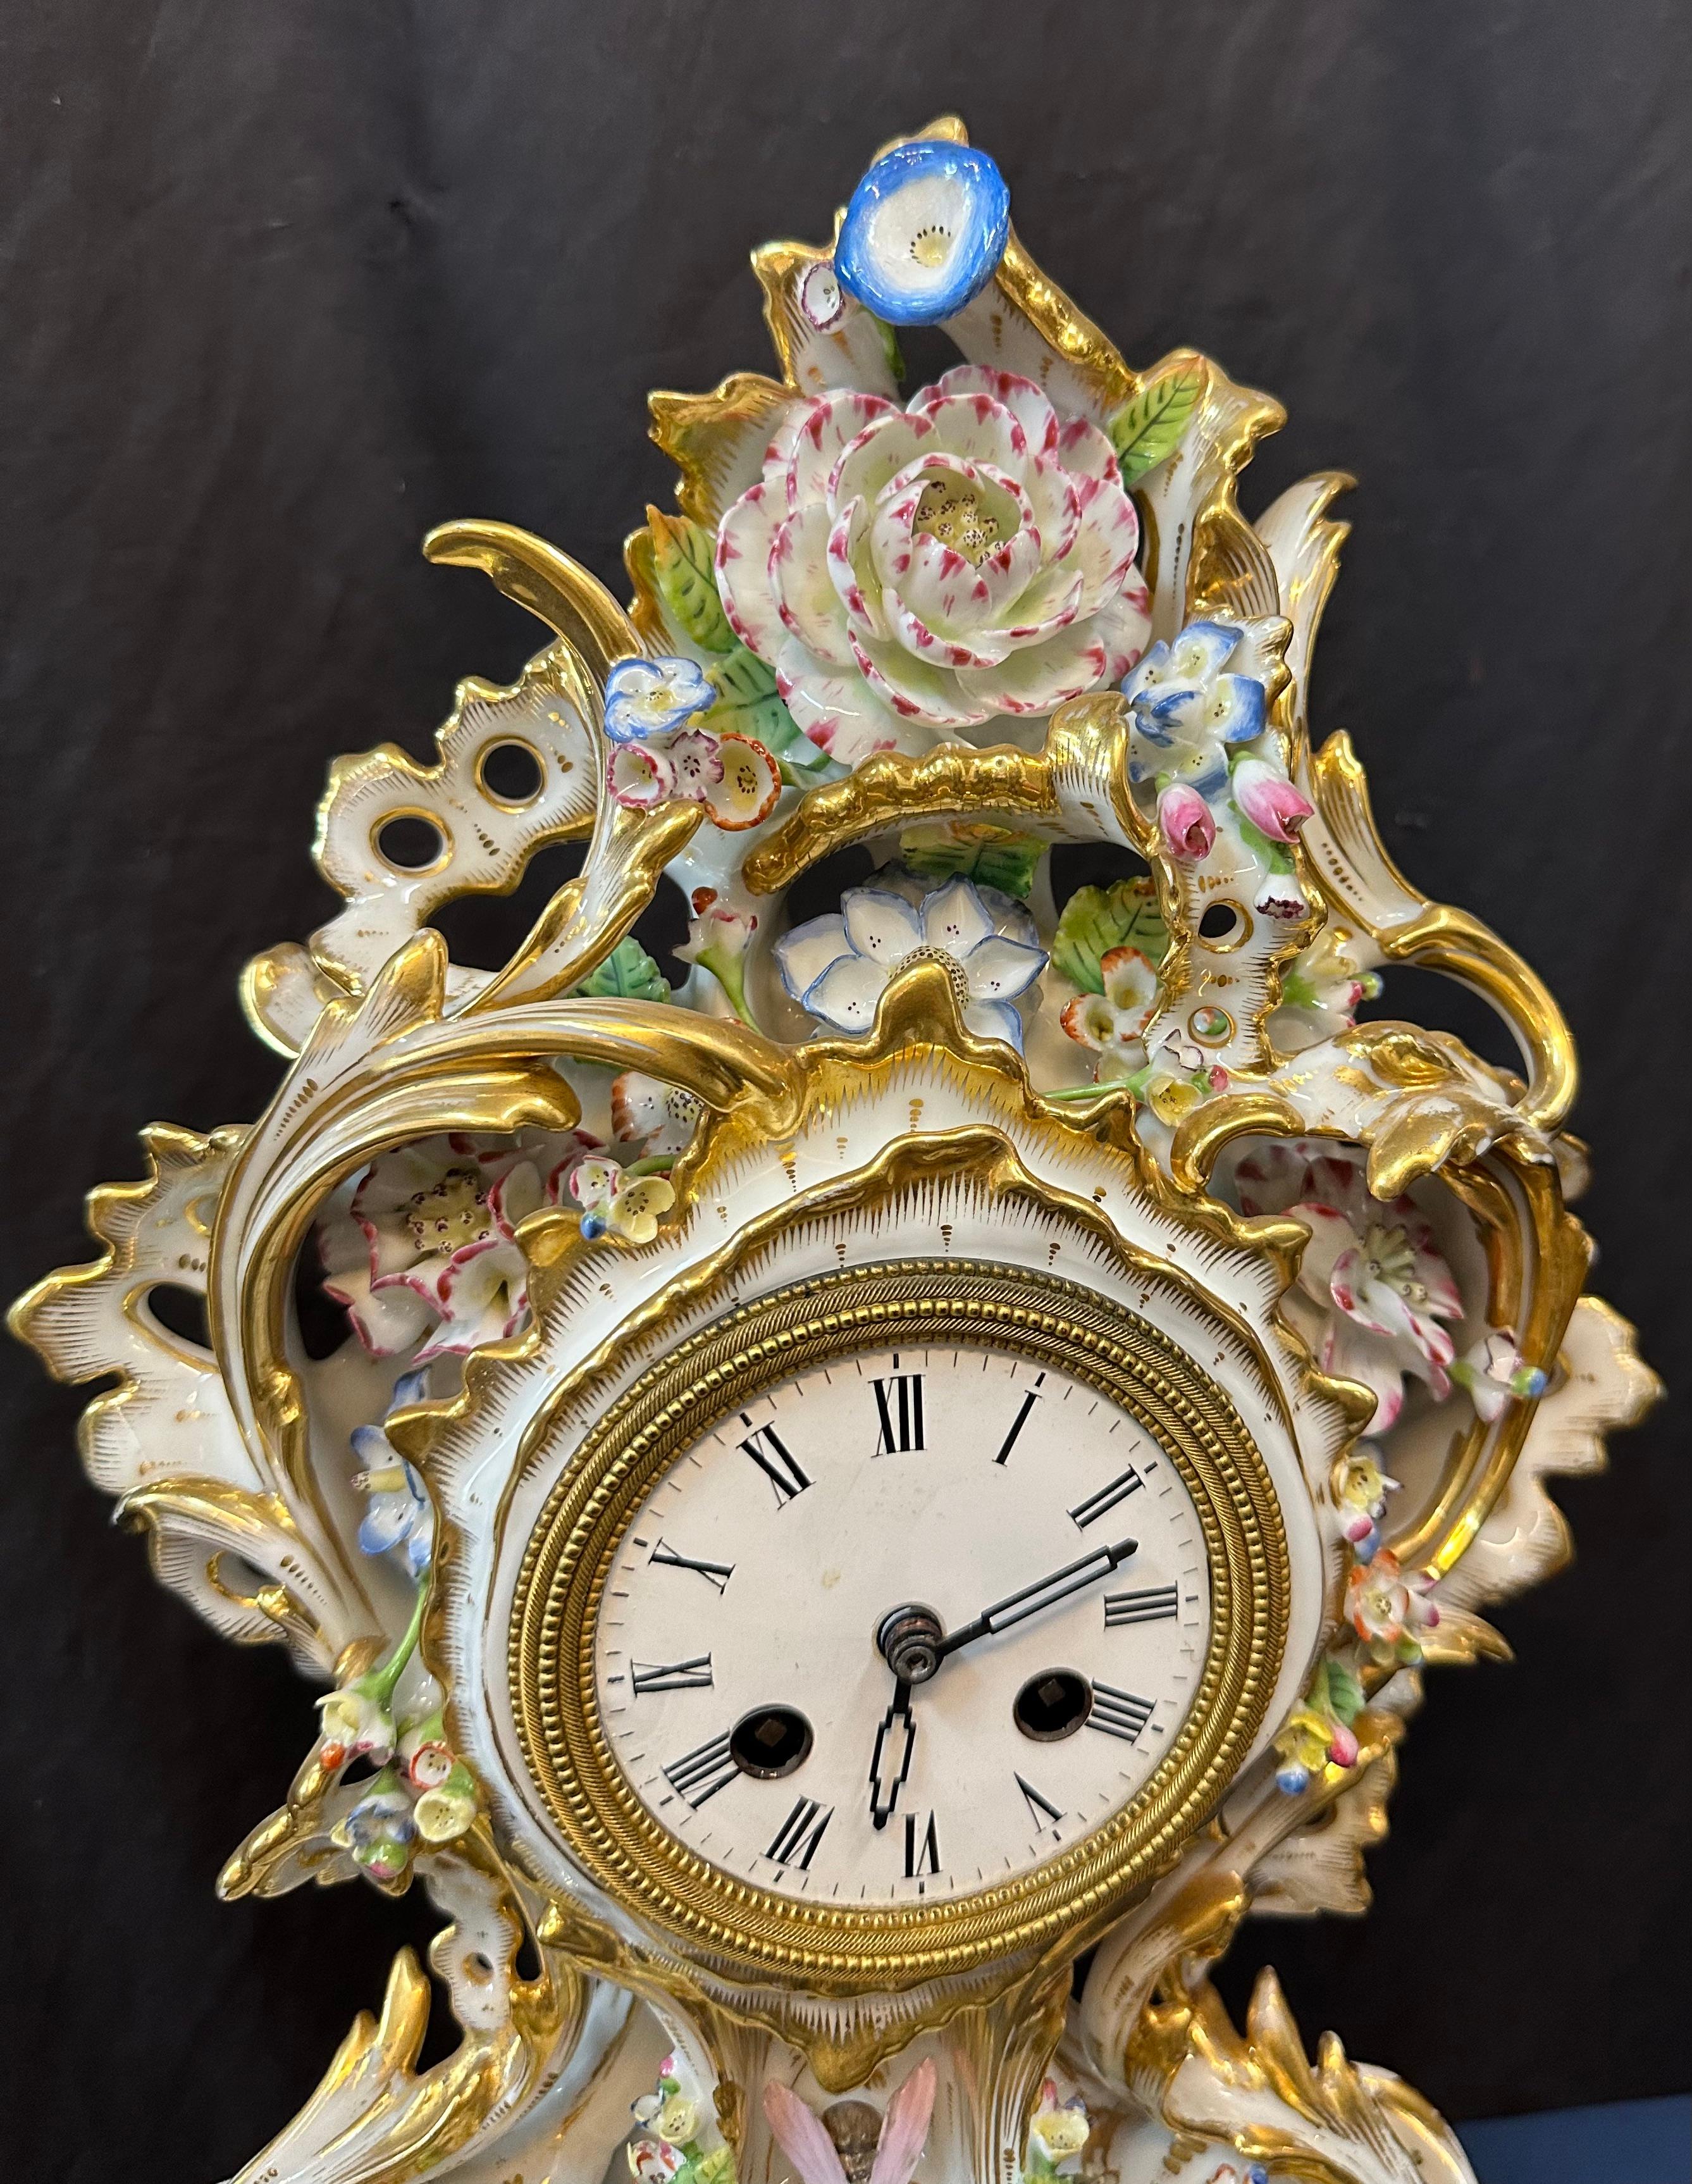 This vintage elaborately decorated French porcelain mantle clock dates from the 1850's. The delicate porcelain has hand painted colorful sculpted flowers, gleaming gold gilt scrolls & painted floral accents that comprise the body of this rare